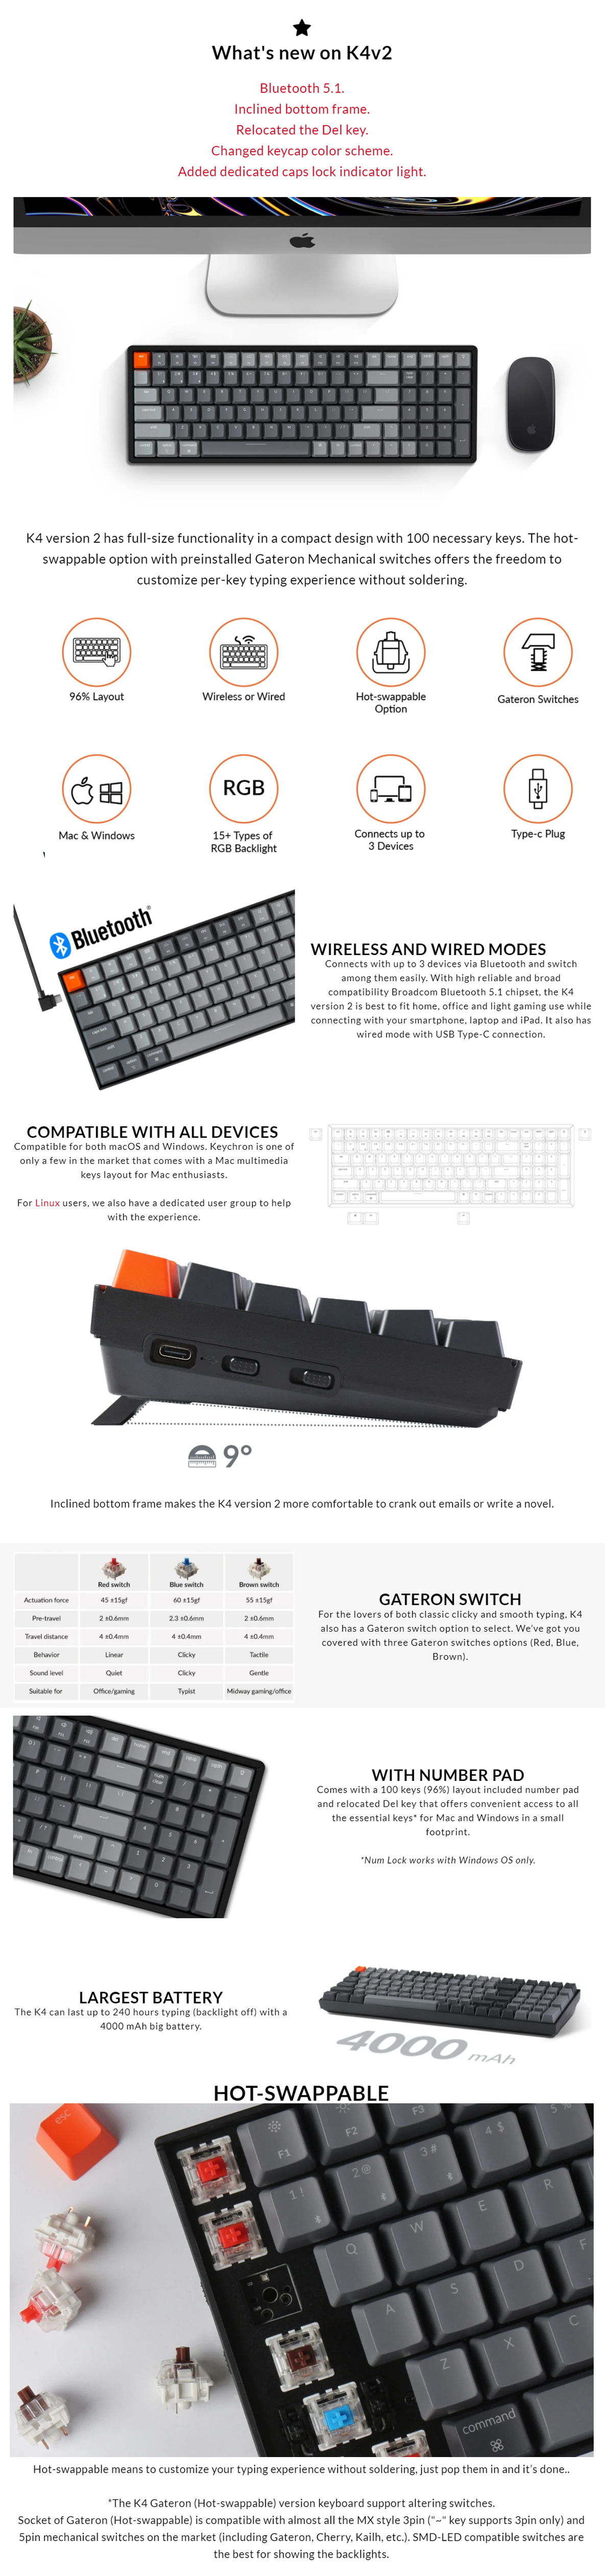 Keyboards-Keychron-K4v2-RGB-Aluminum-Frame-Wireless-Wired-Compact-Mechanical-Keyboard-Red-Switch-4